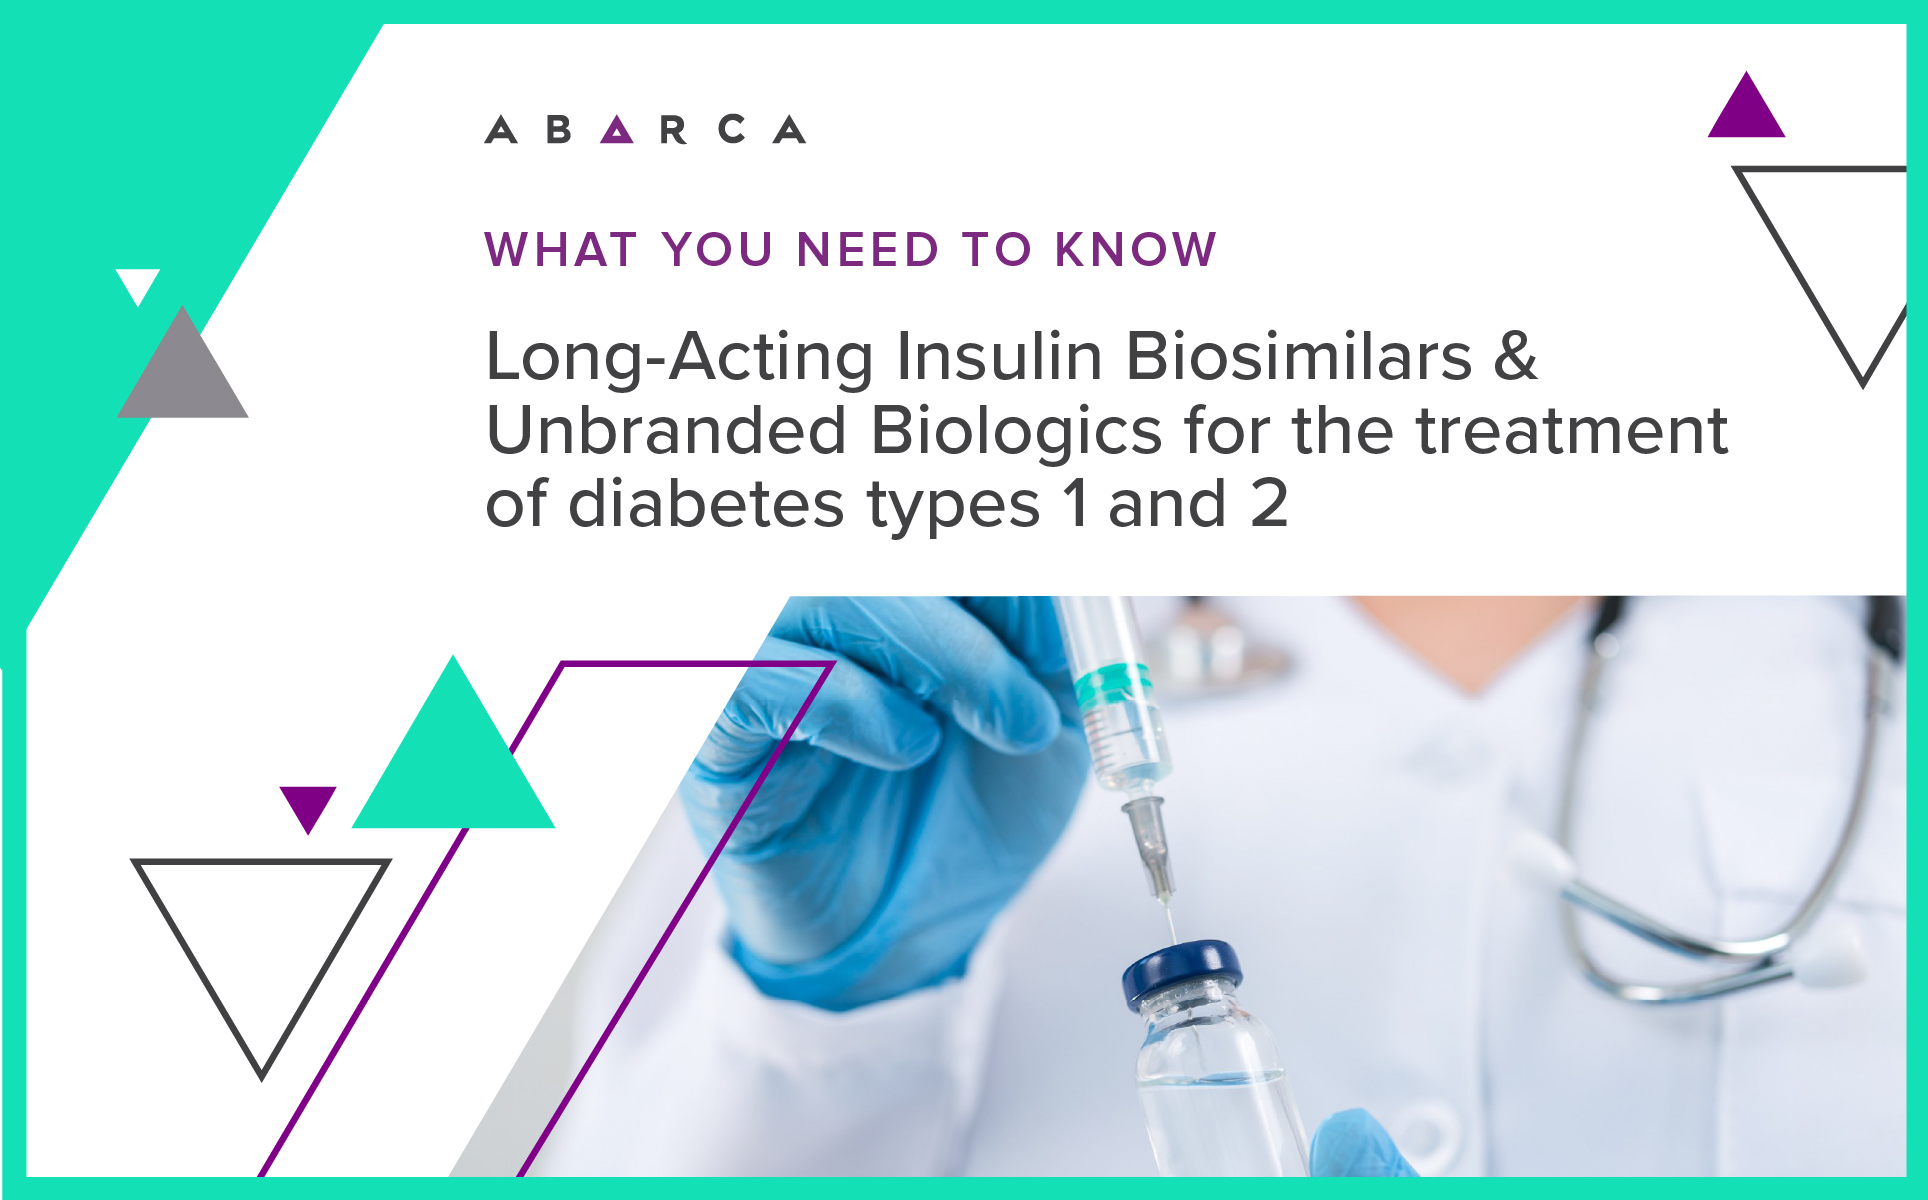 Abarca Health: Long-Acting Insulin Biosimilars & Unbranded Biologics for the treatment of diabetes types 1 and 2